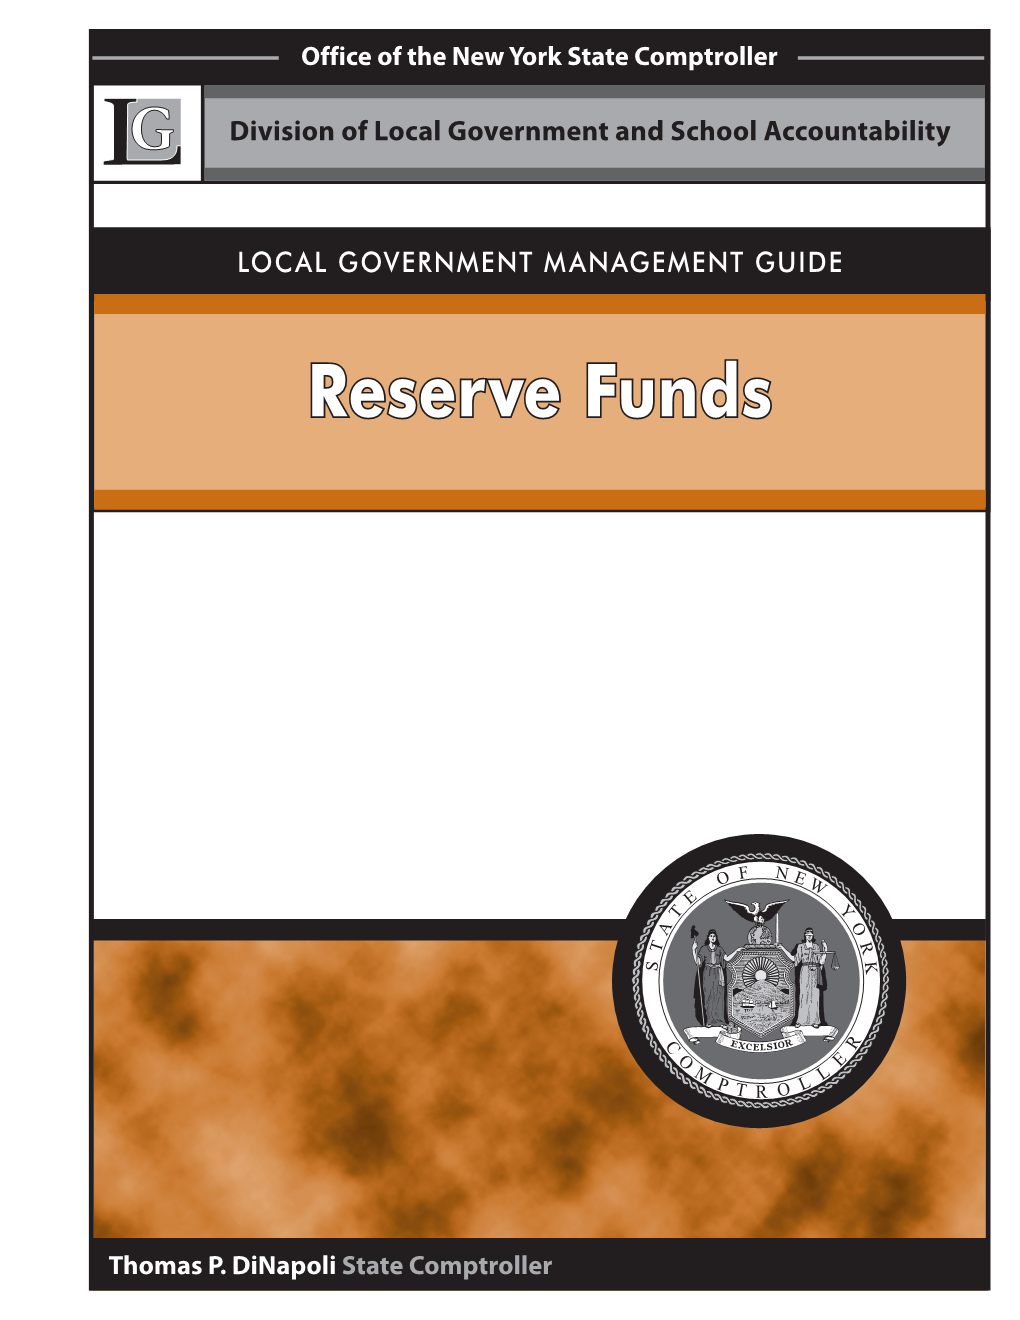 Reserve Funds